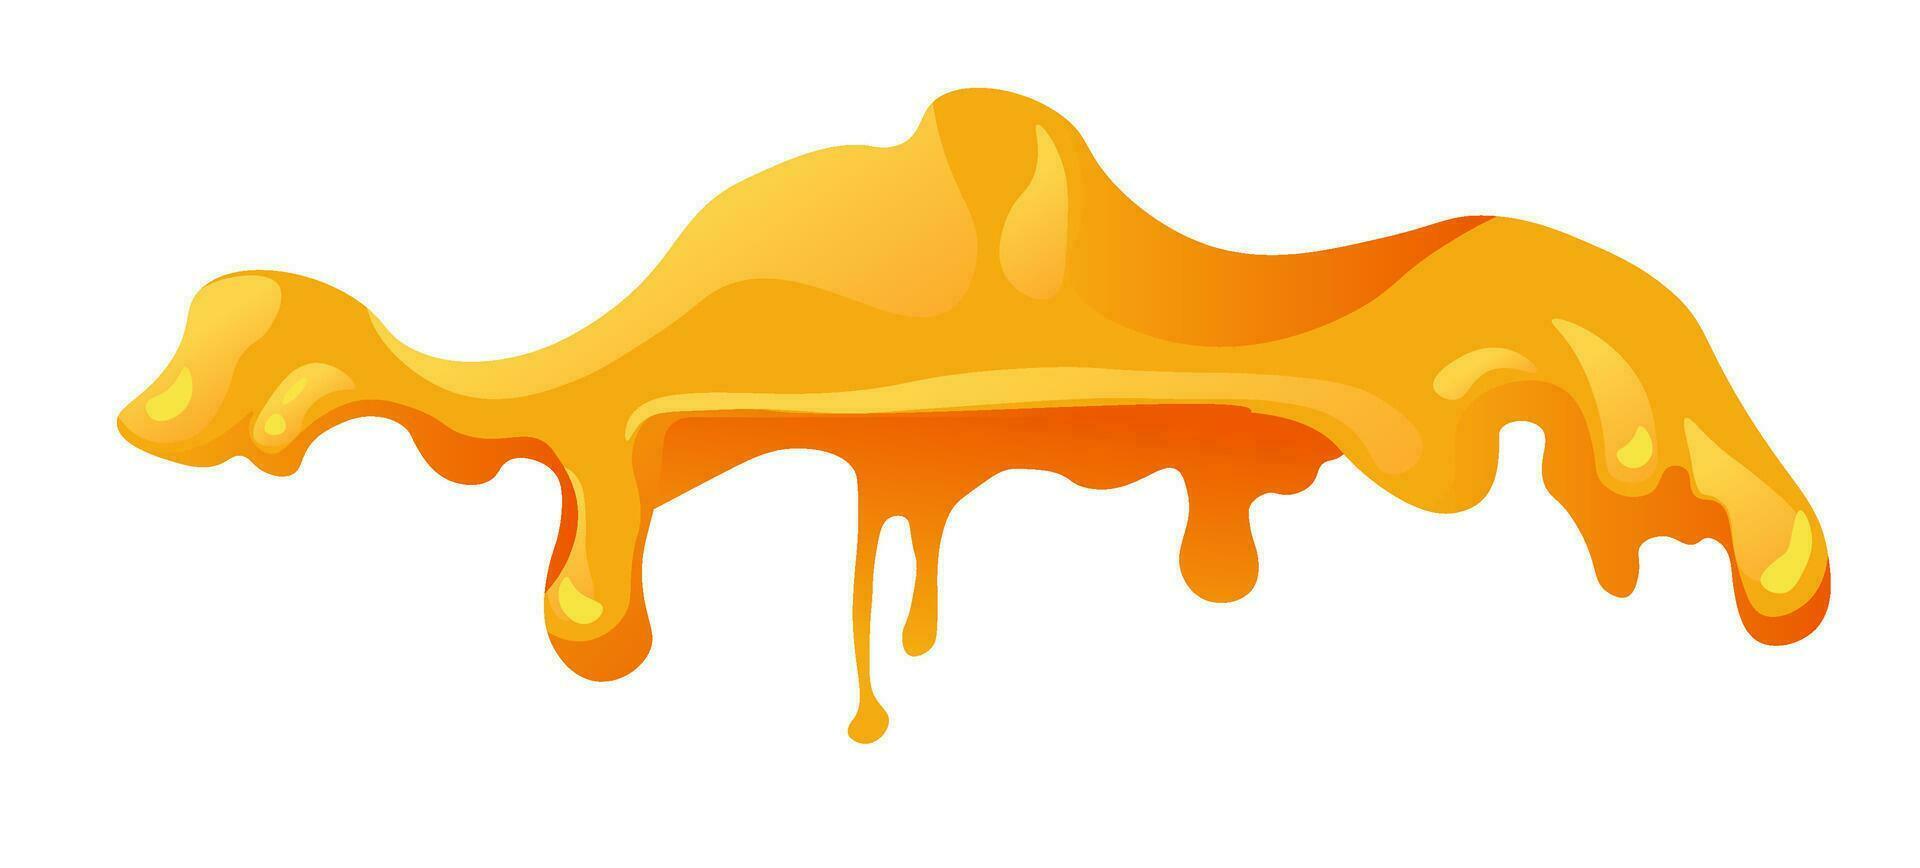 Honey sweet nectar or syrup with sticky texture vector